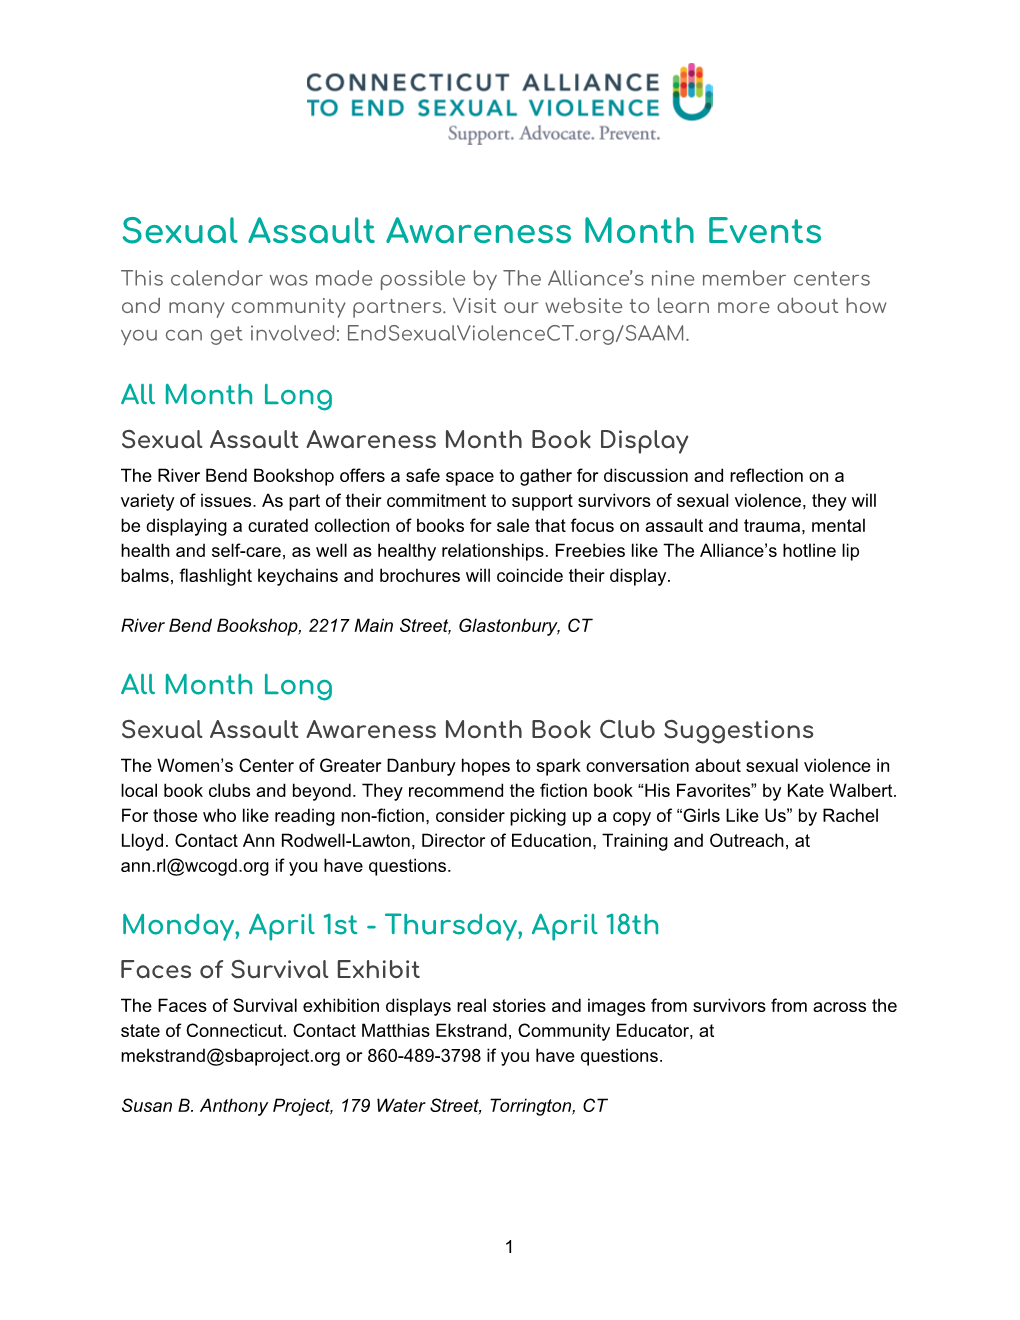 Sexual Assault Awareness Month Events This Calendar Was Made Possible by the Alliance’S Nine Member Centers and Many Community Partners